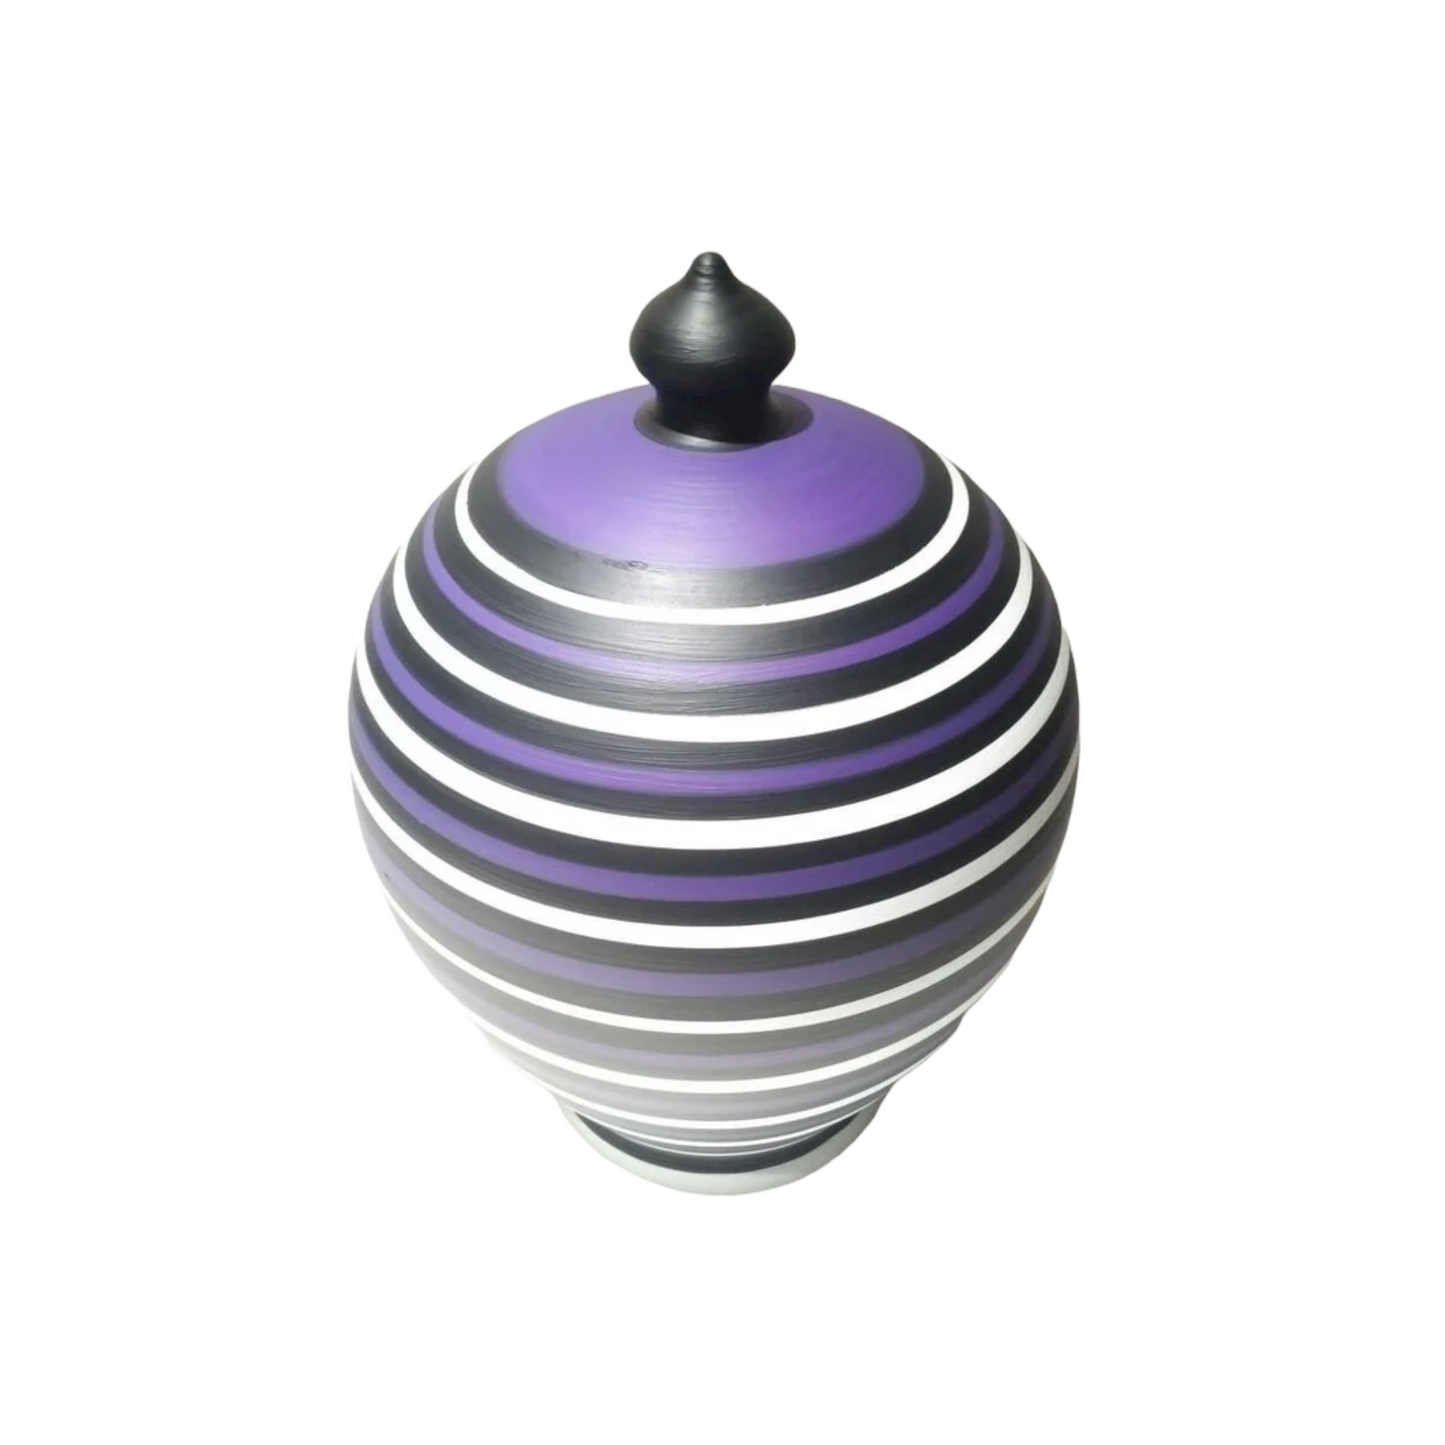 Ultramarine Violet, Black and White stripes, pottery piggy bank size 17 cm with or without hole